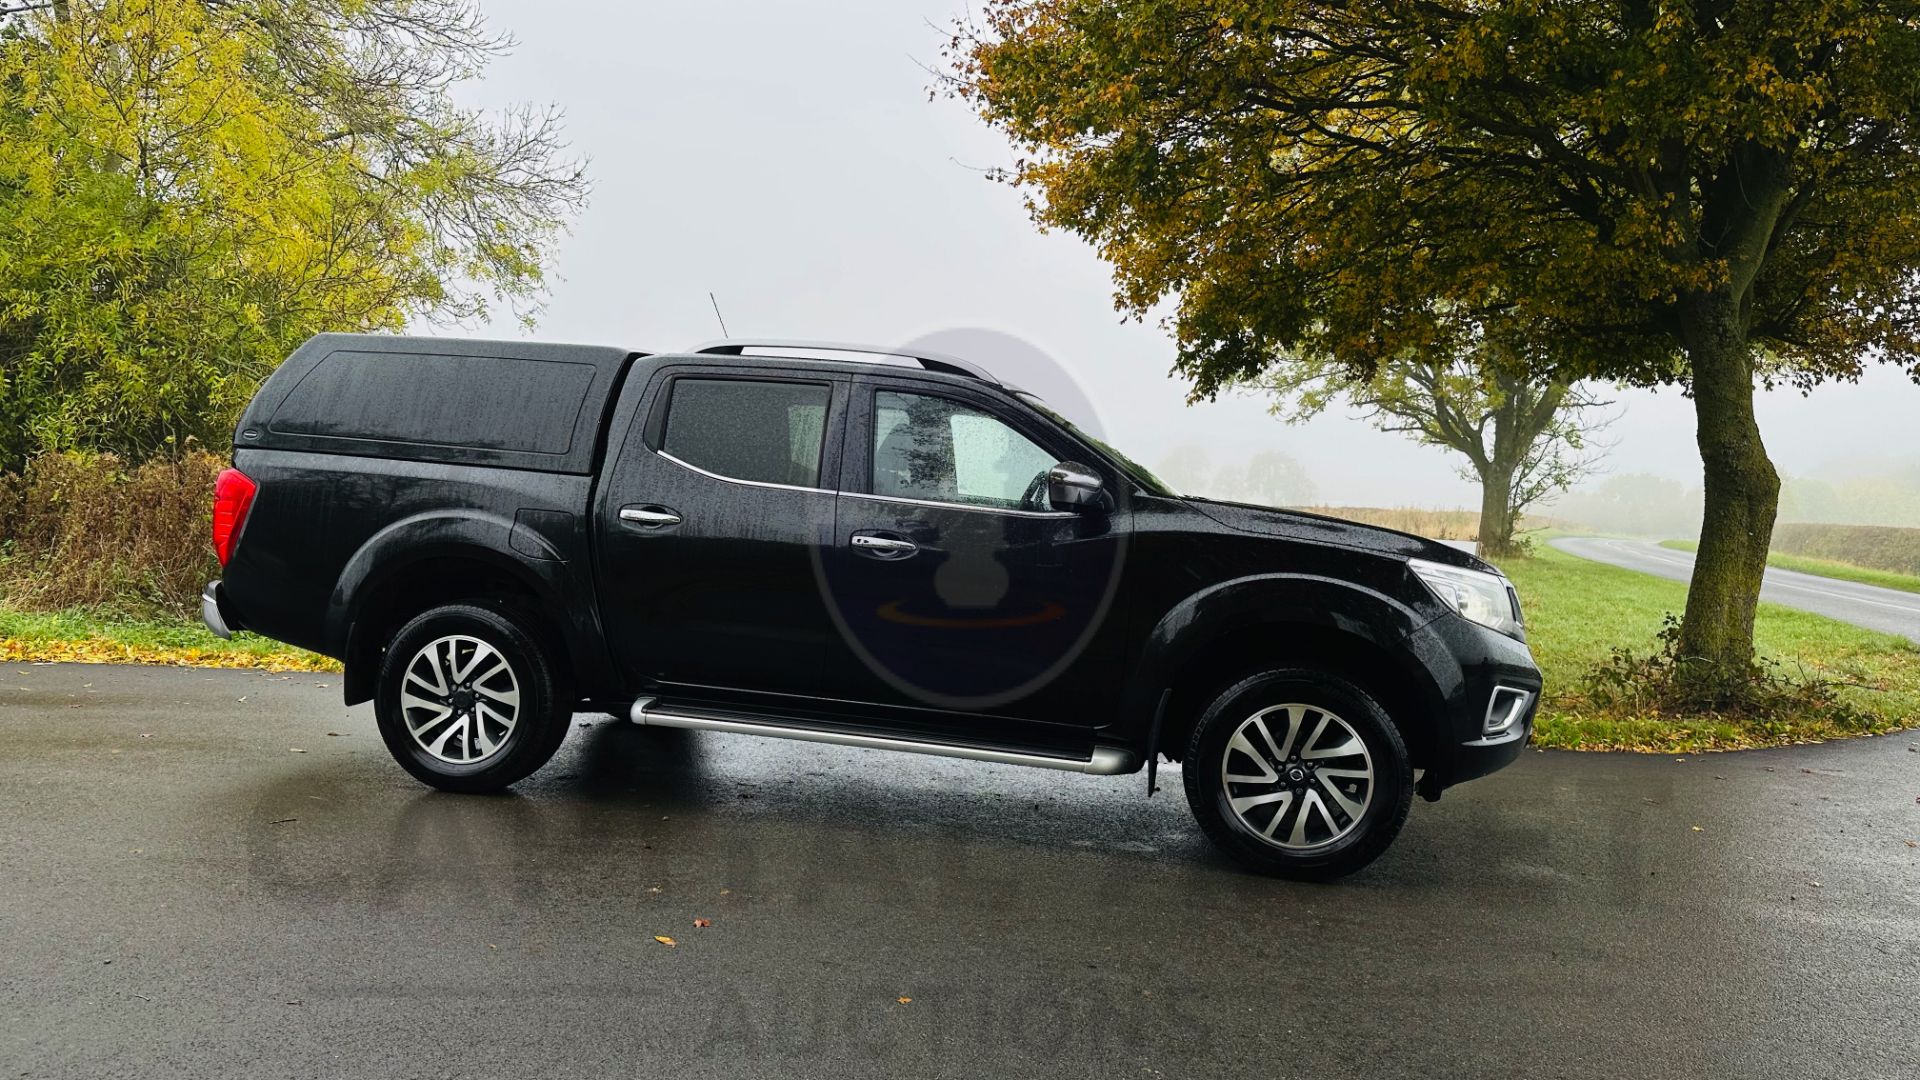 NISSAN NAVARA *TEKNA EDITION* DOUBLE CAB PICK-UP (2019 - EURO 6) 2.3 DCI - STOP/START (1 OWNER) - Image 14 of 48